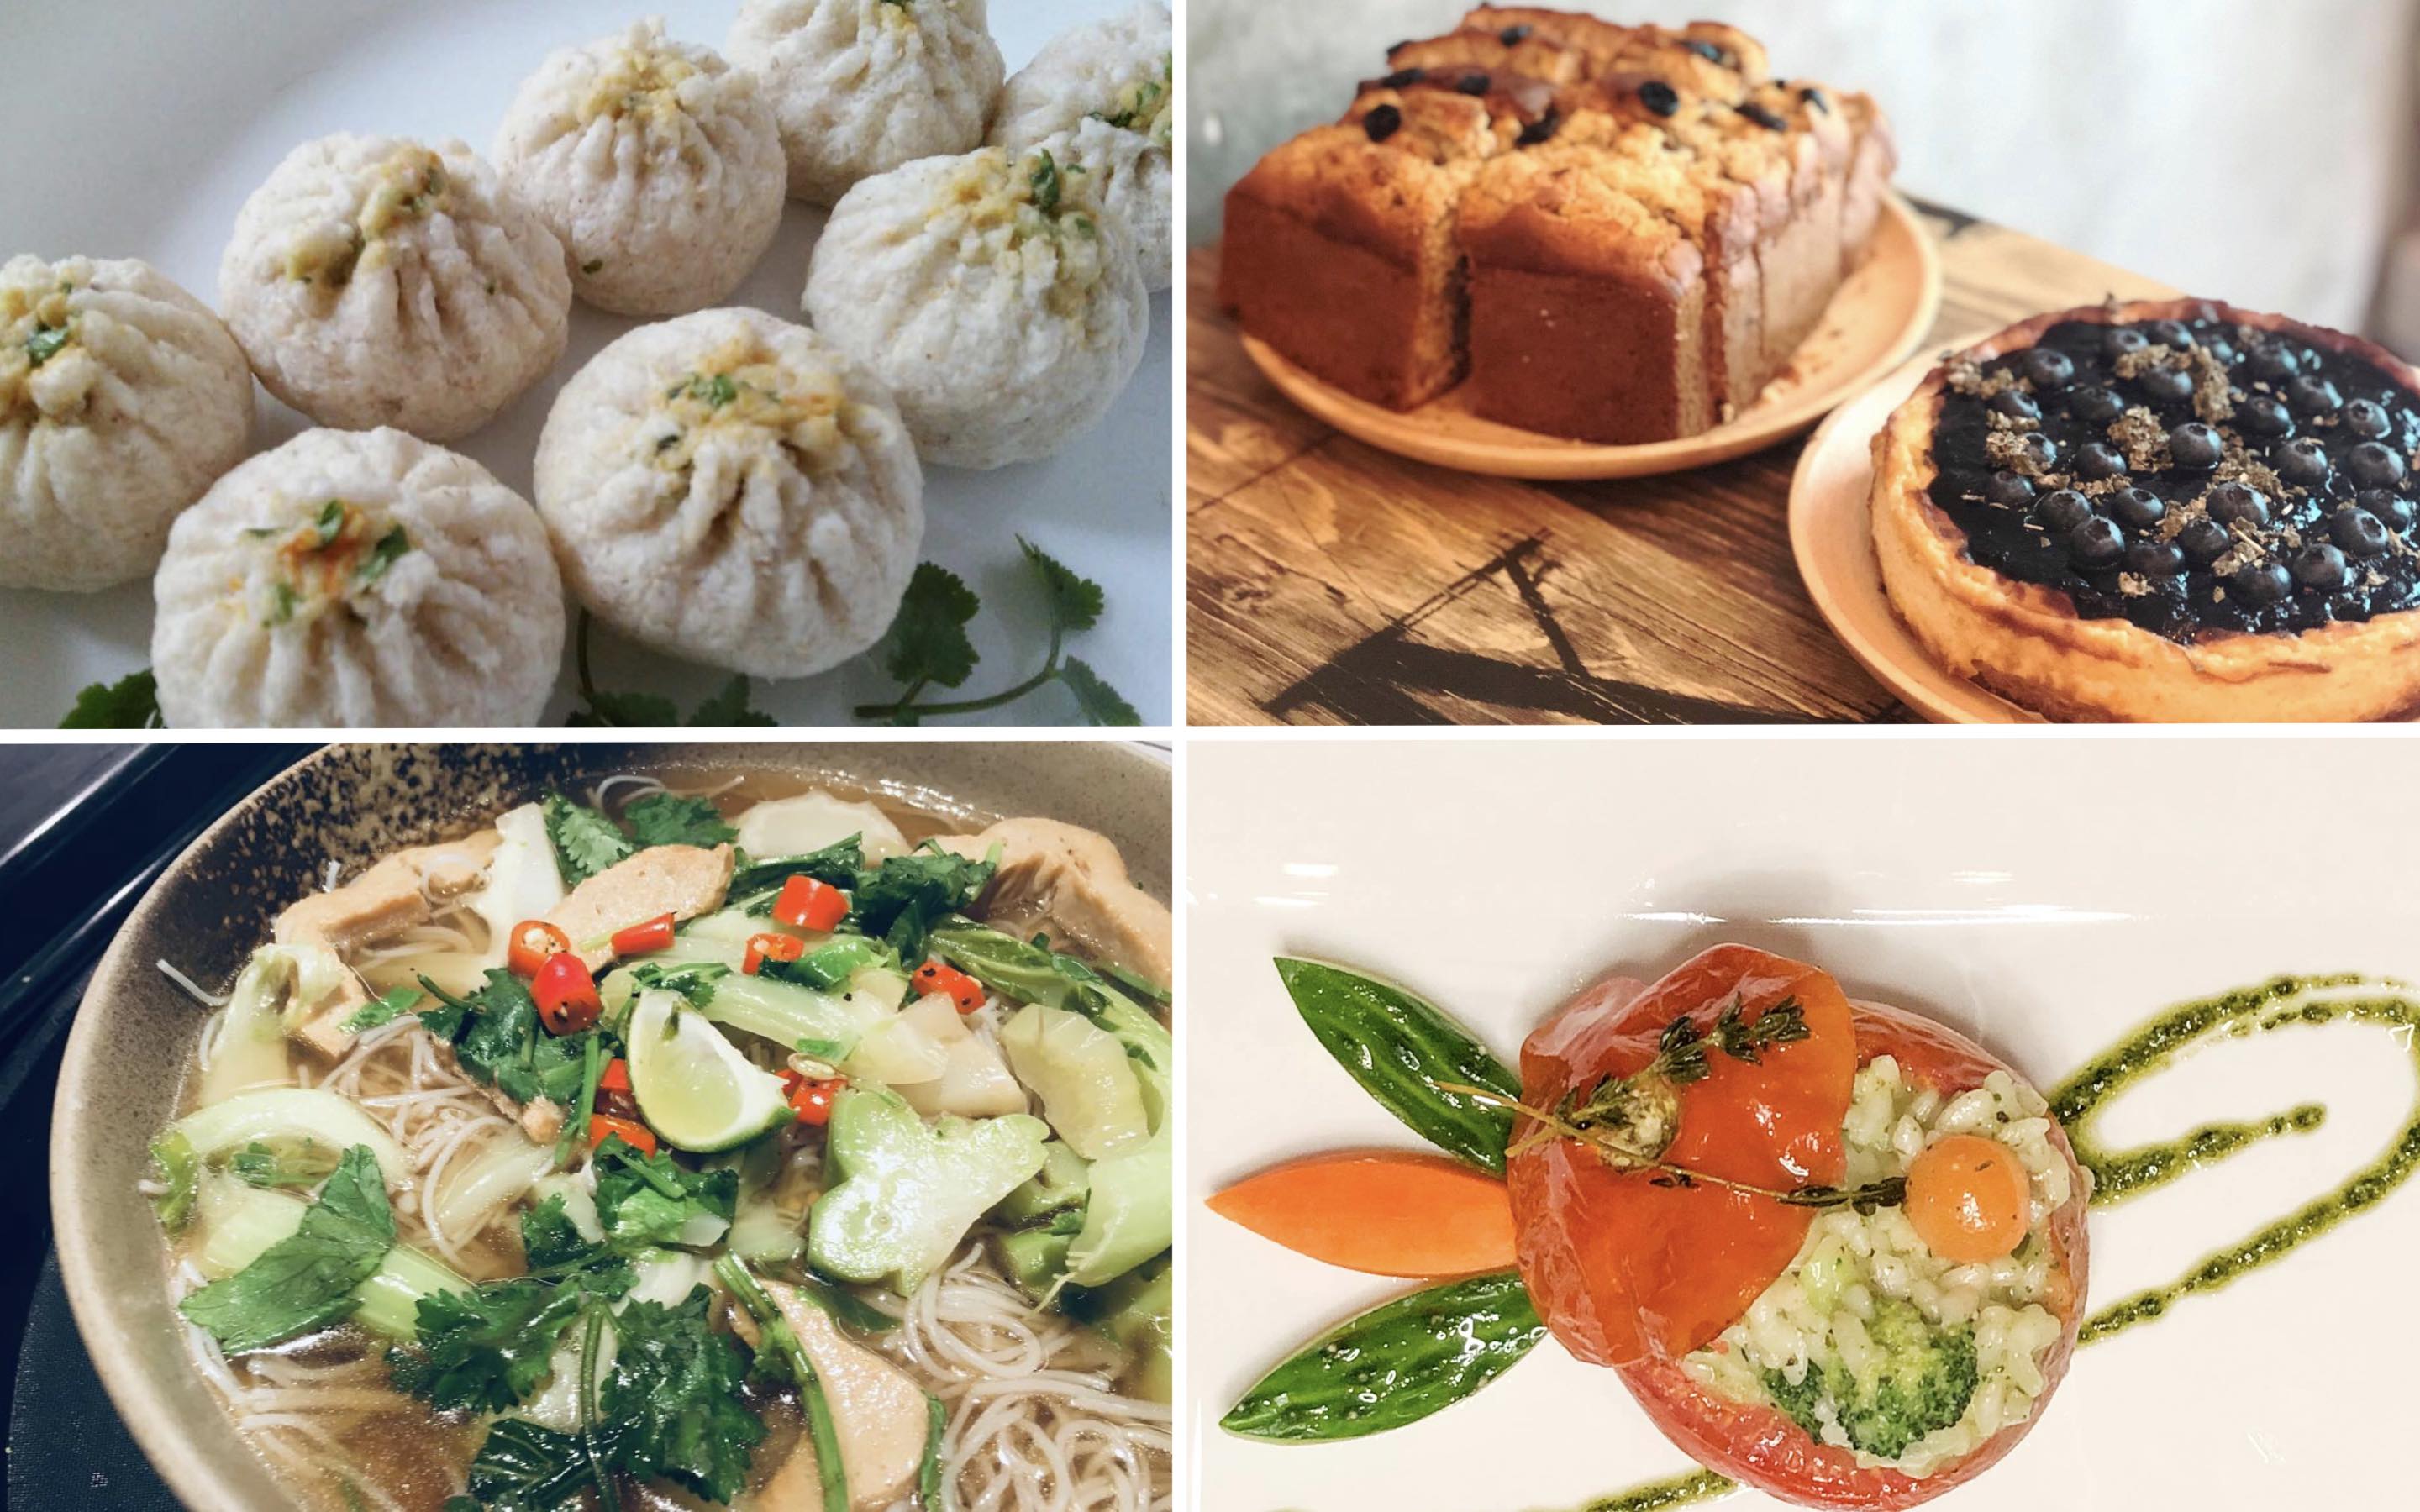 (Clockwise from left) A selection of vegetarian and vegan dishes from Greenwoods Raw Cafe, Ohms, LockCha, and Grassroots Pantry. Photos via Facebook and Instagram.